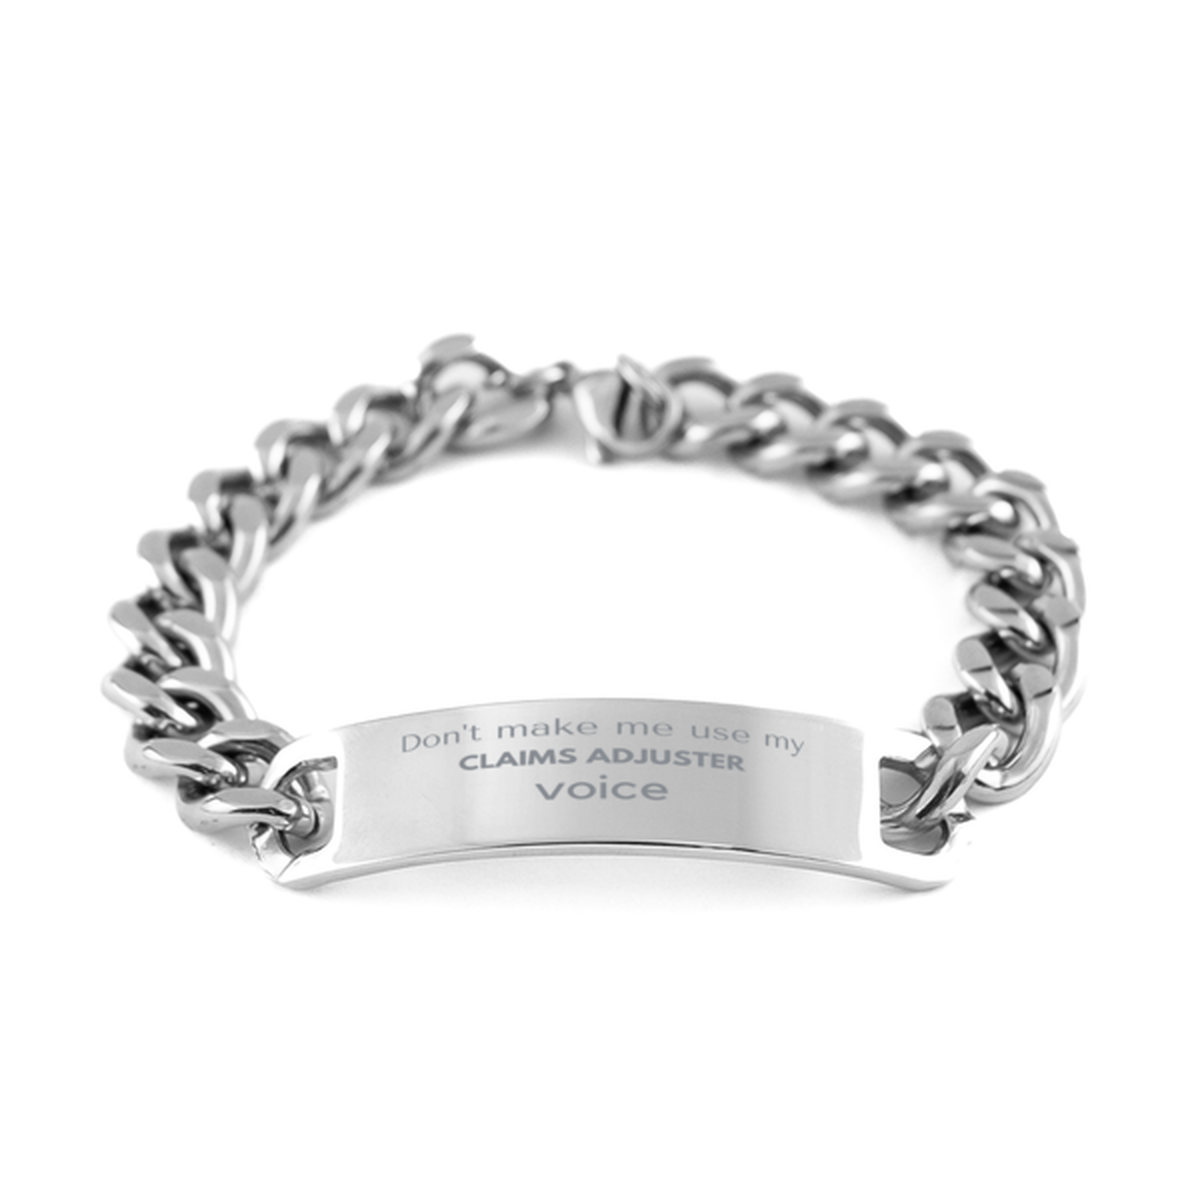 Don't make me use my Claims Adjuster voice, Sarcasm Claims Adjuster Gifts, Christmas Claims Adjuster Cuban Chain Stainless Steel Bracelet Birthday Unique Gifts For Claims Adjuster Coworkers, Men, Women, Colleague, Friends